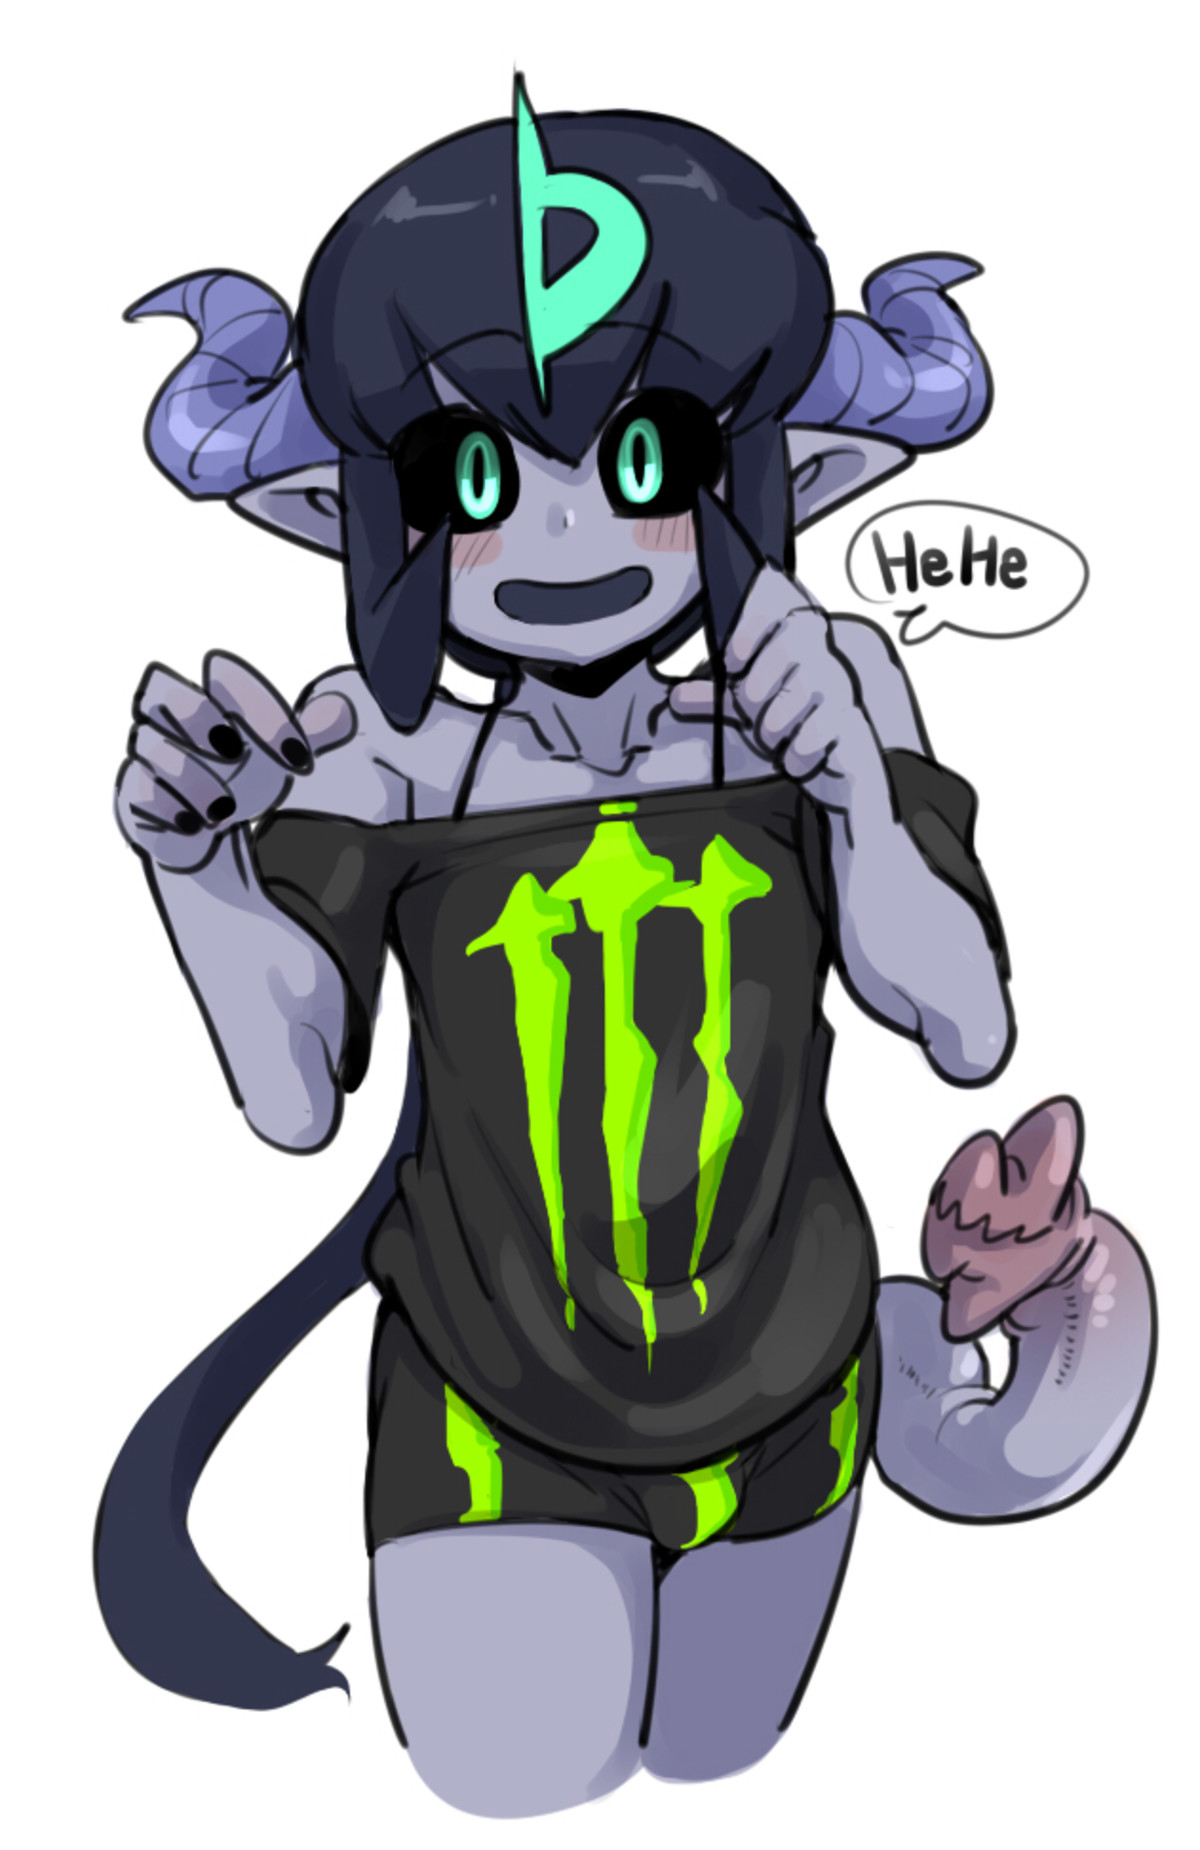 More anime (girls) with monster energy